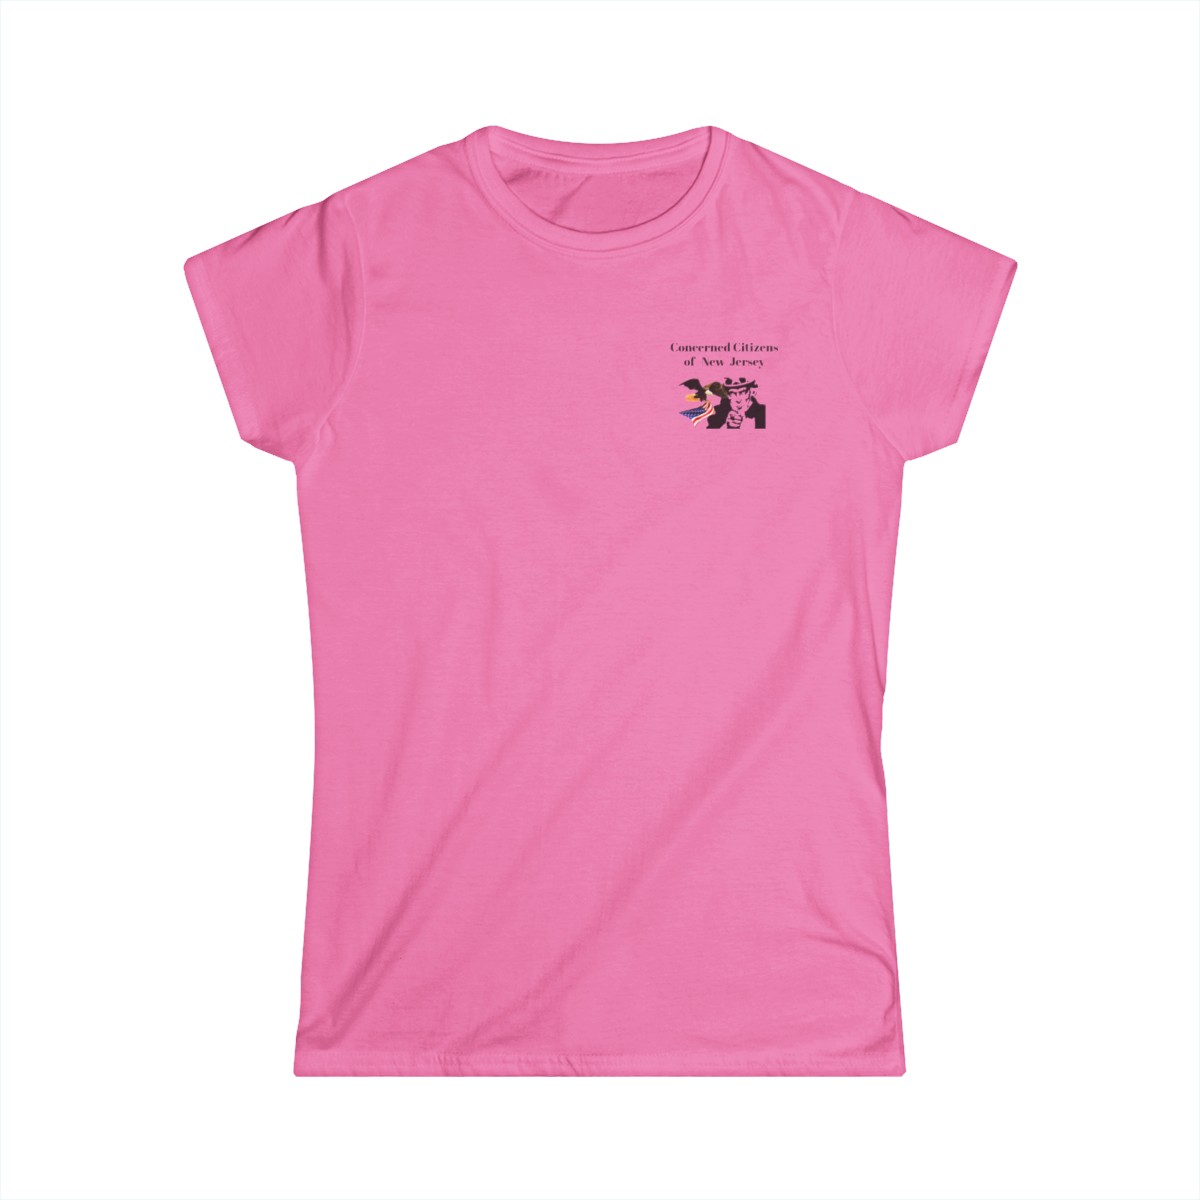  womens FRONT (concerned citizens + logo), BACK (motto) -3 product main image